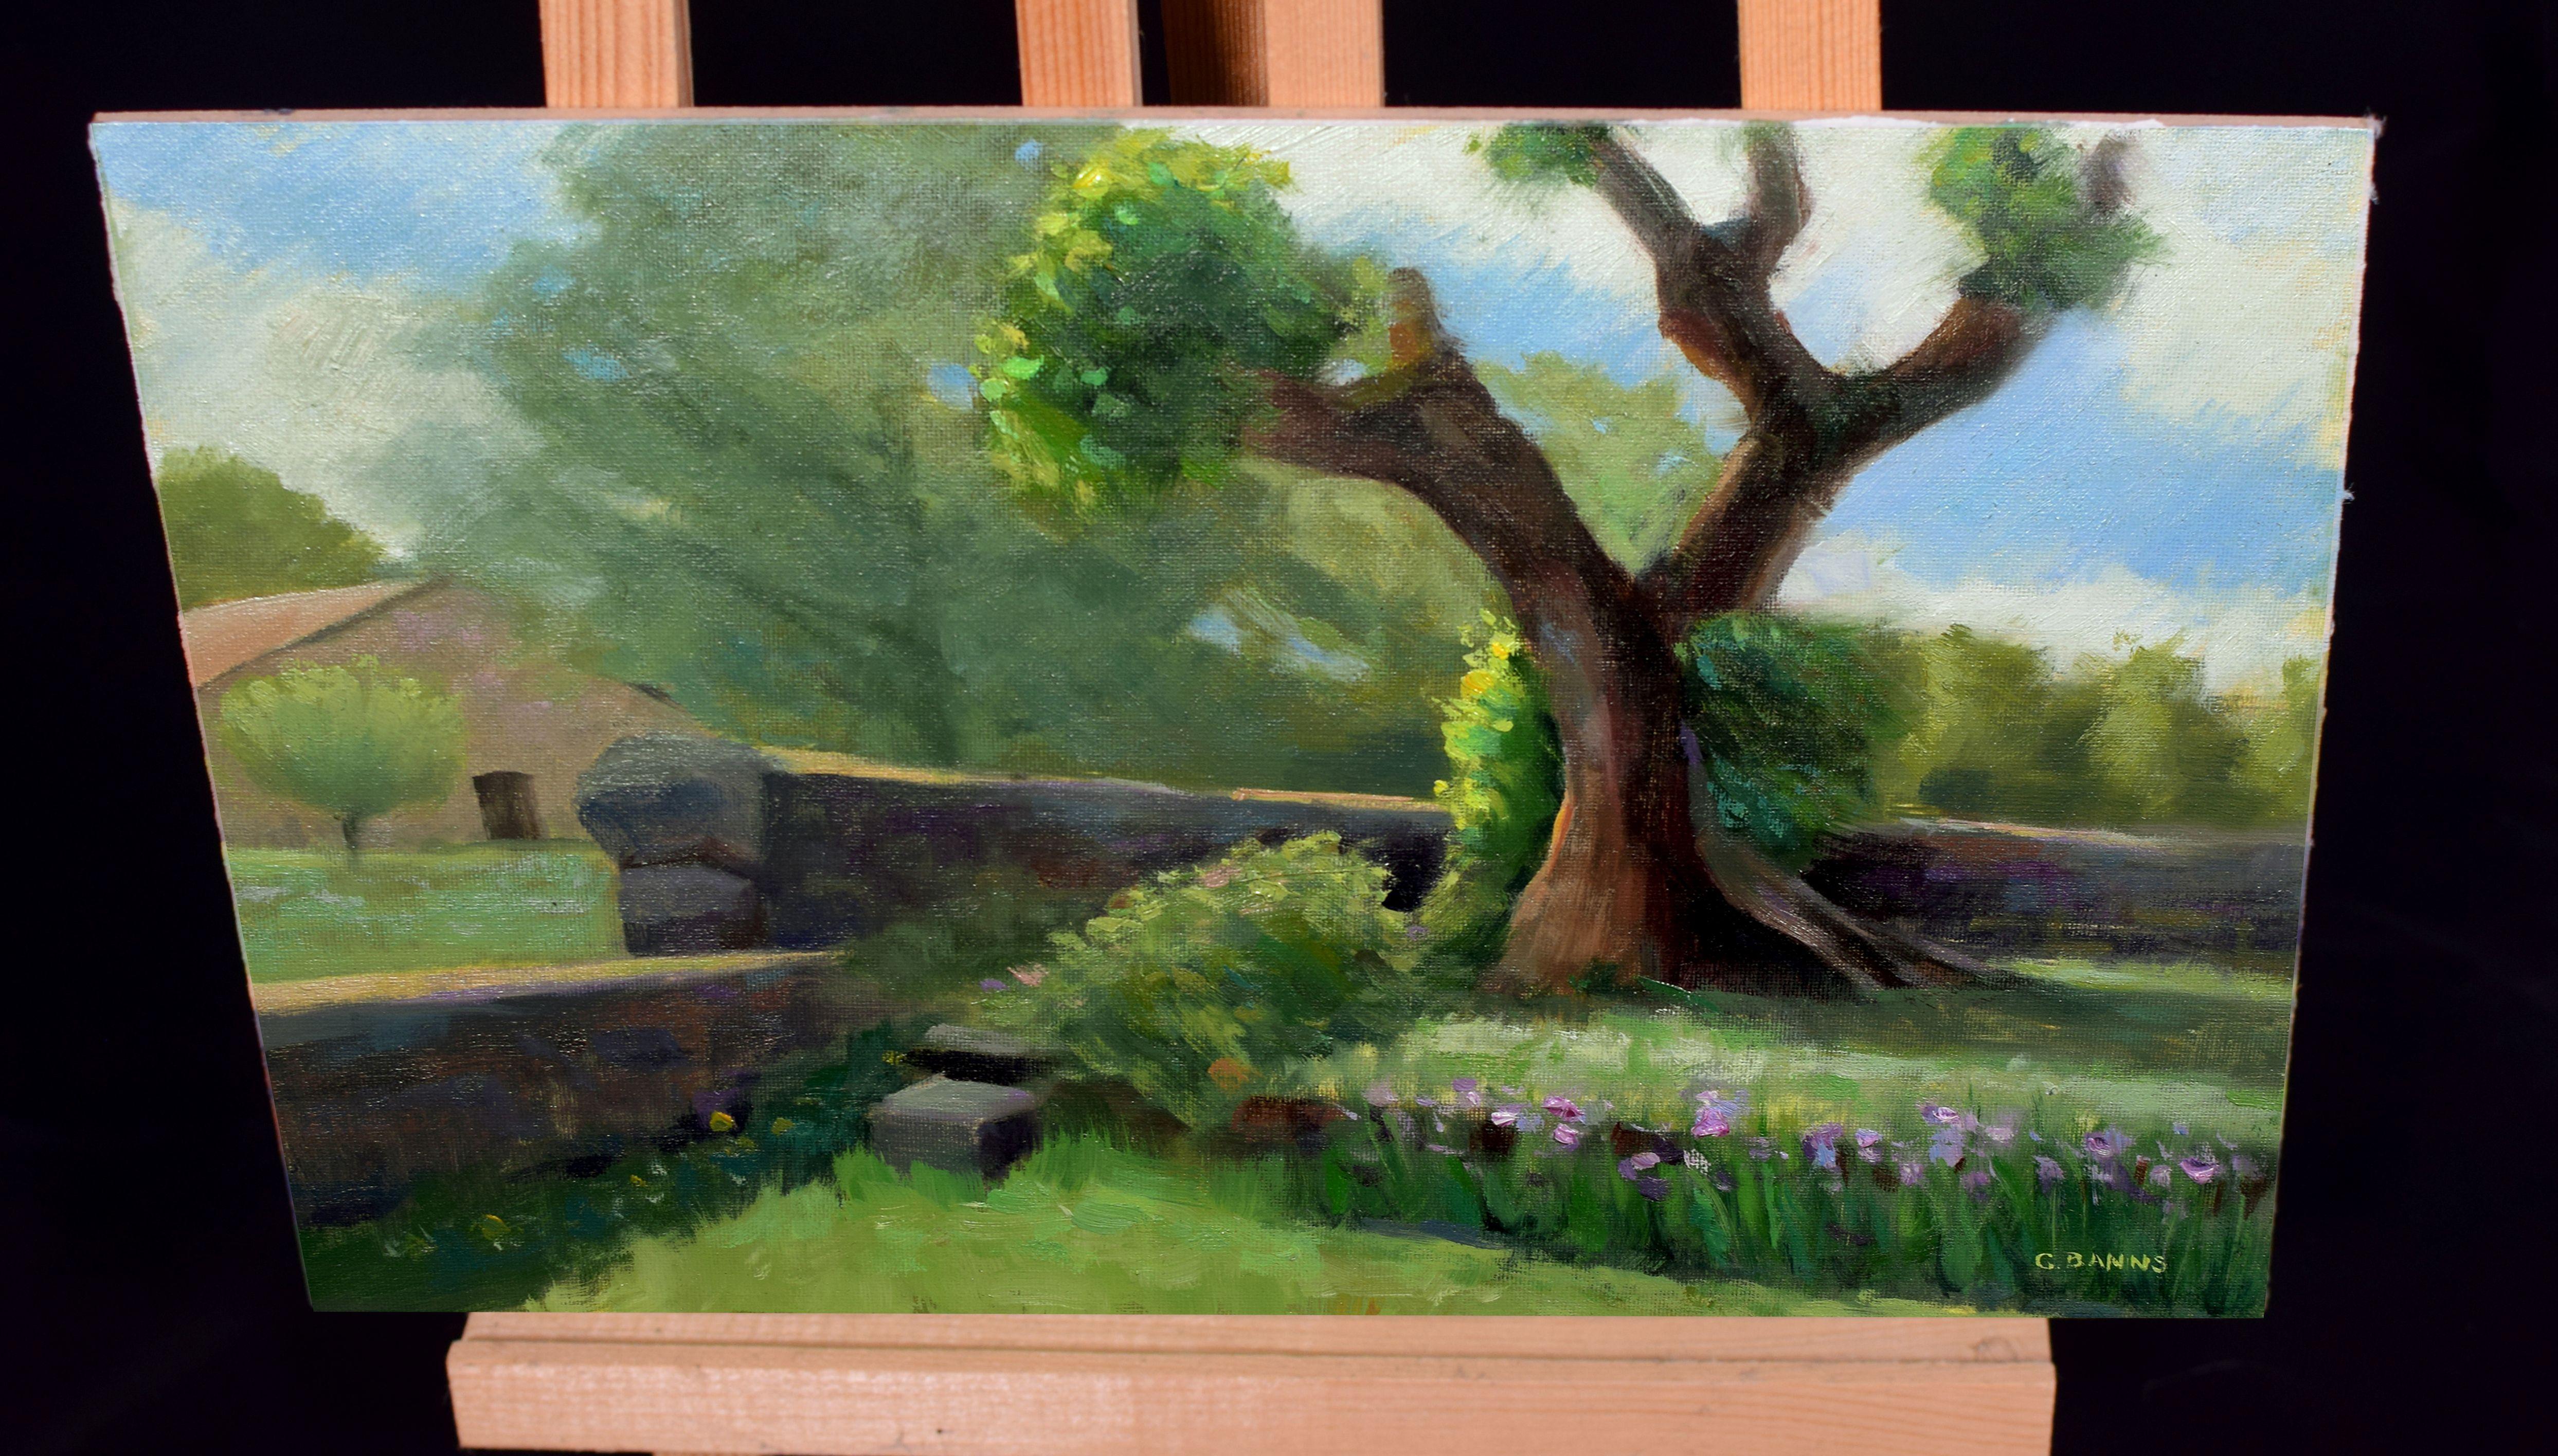 The old tree sits next to a medieval church (out of view) surrounded by several monasteries and an old stone barn as shown in the background, in Limousin France.    The painting is on Italian canvas attached to a wooden board and has been left to